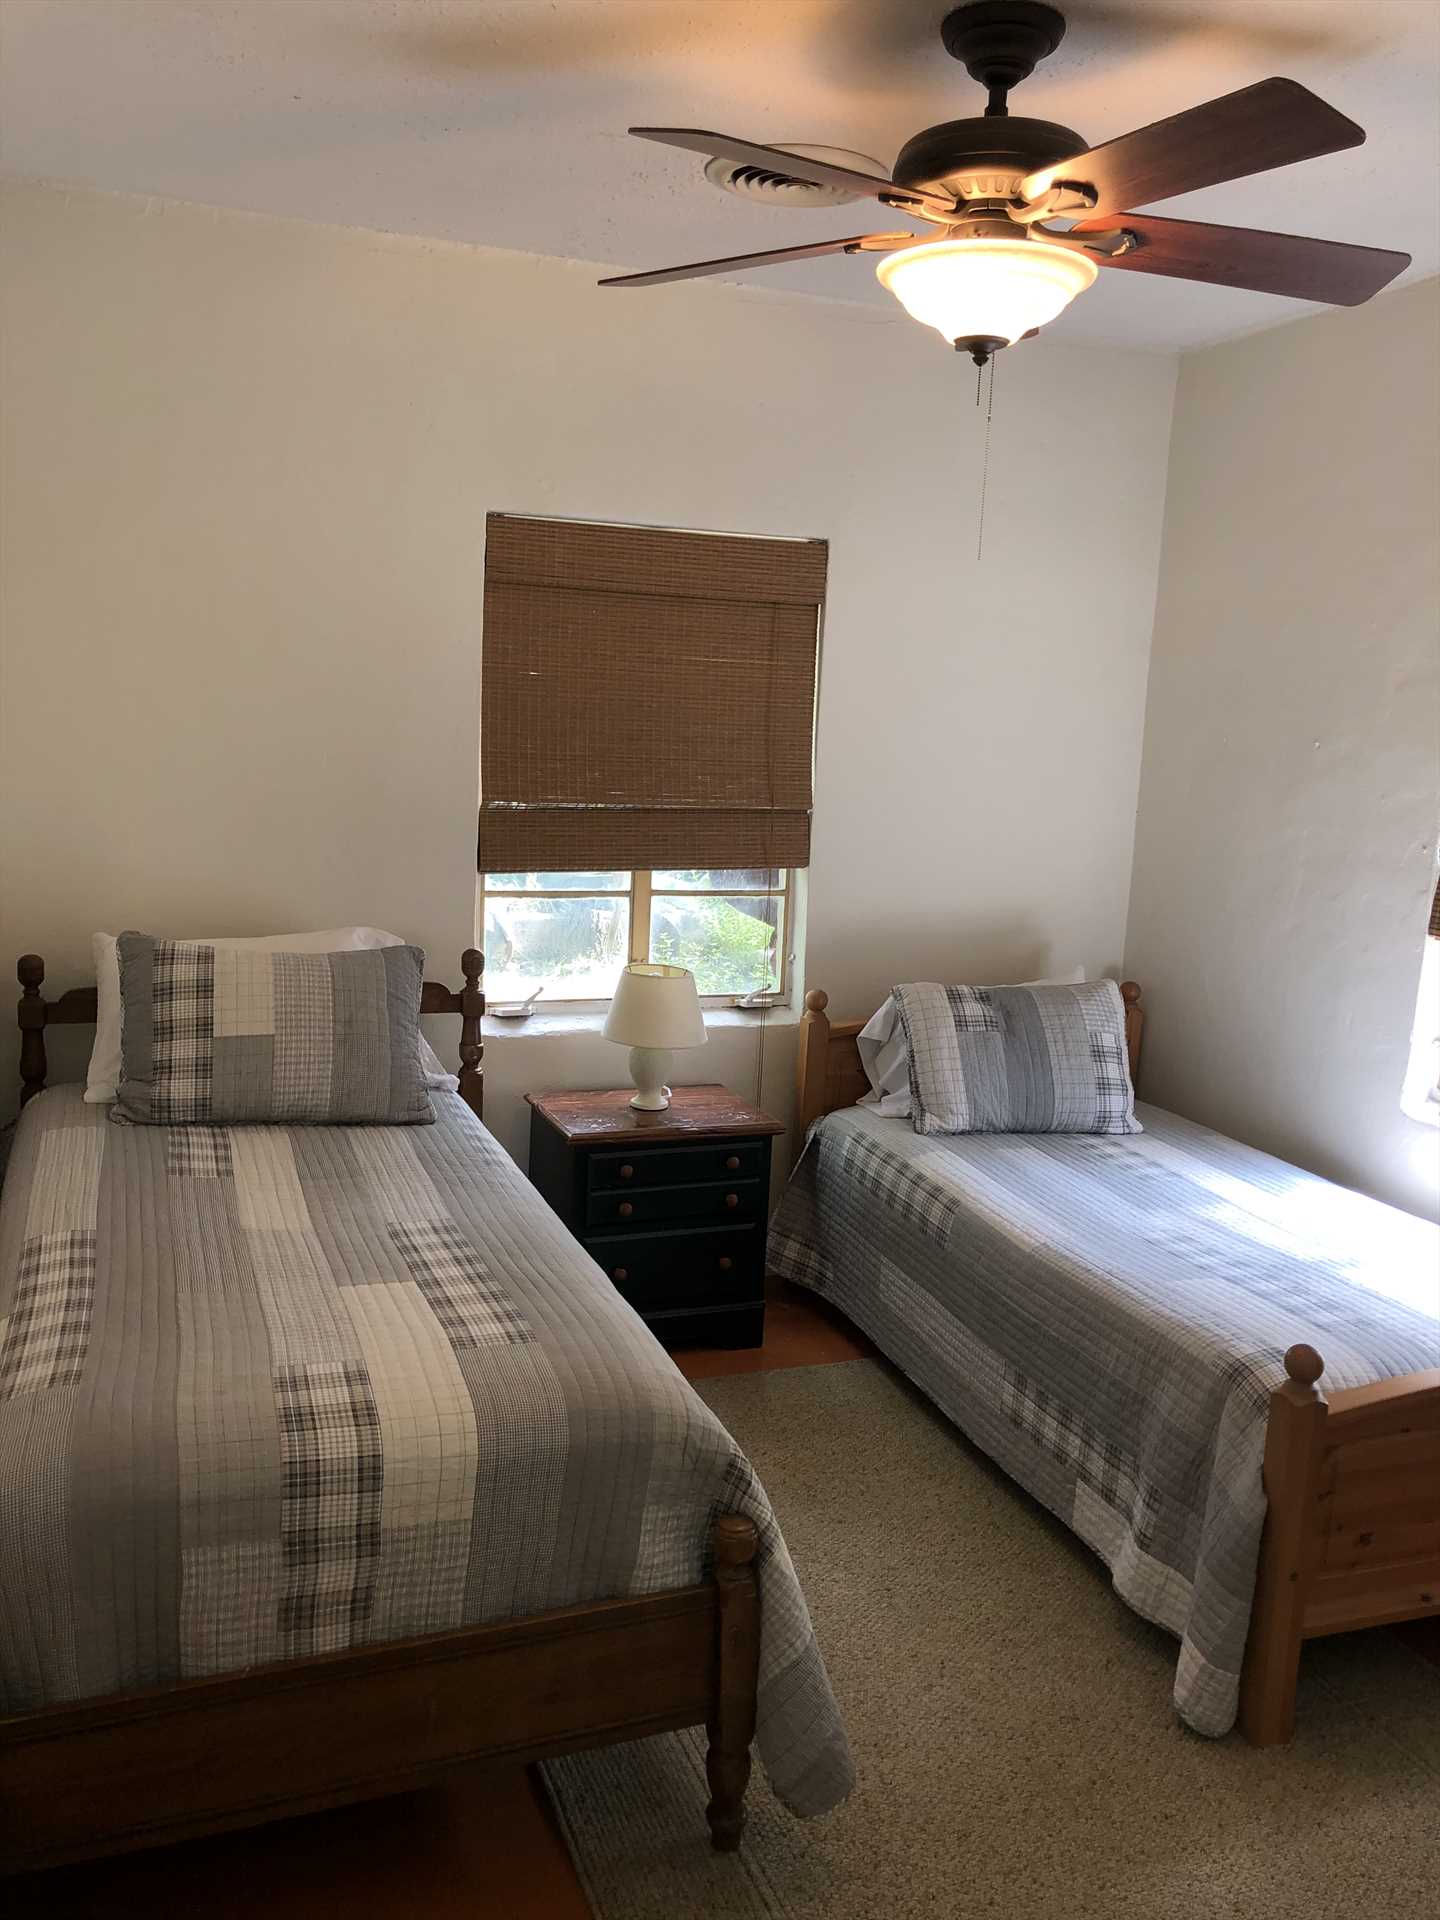                                                 Two twins and a full-sized bed in the fourth bedroom round out the accommodations in the four bedrooms. All told, Casa del Rio sleeps up to a dozen guests!